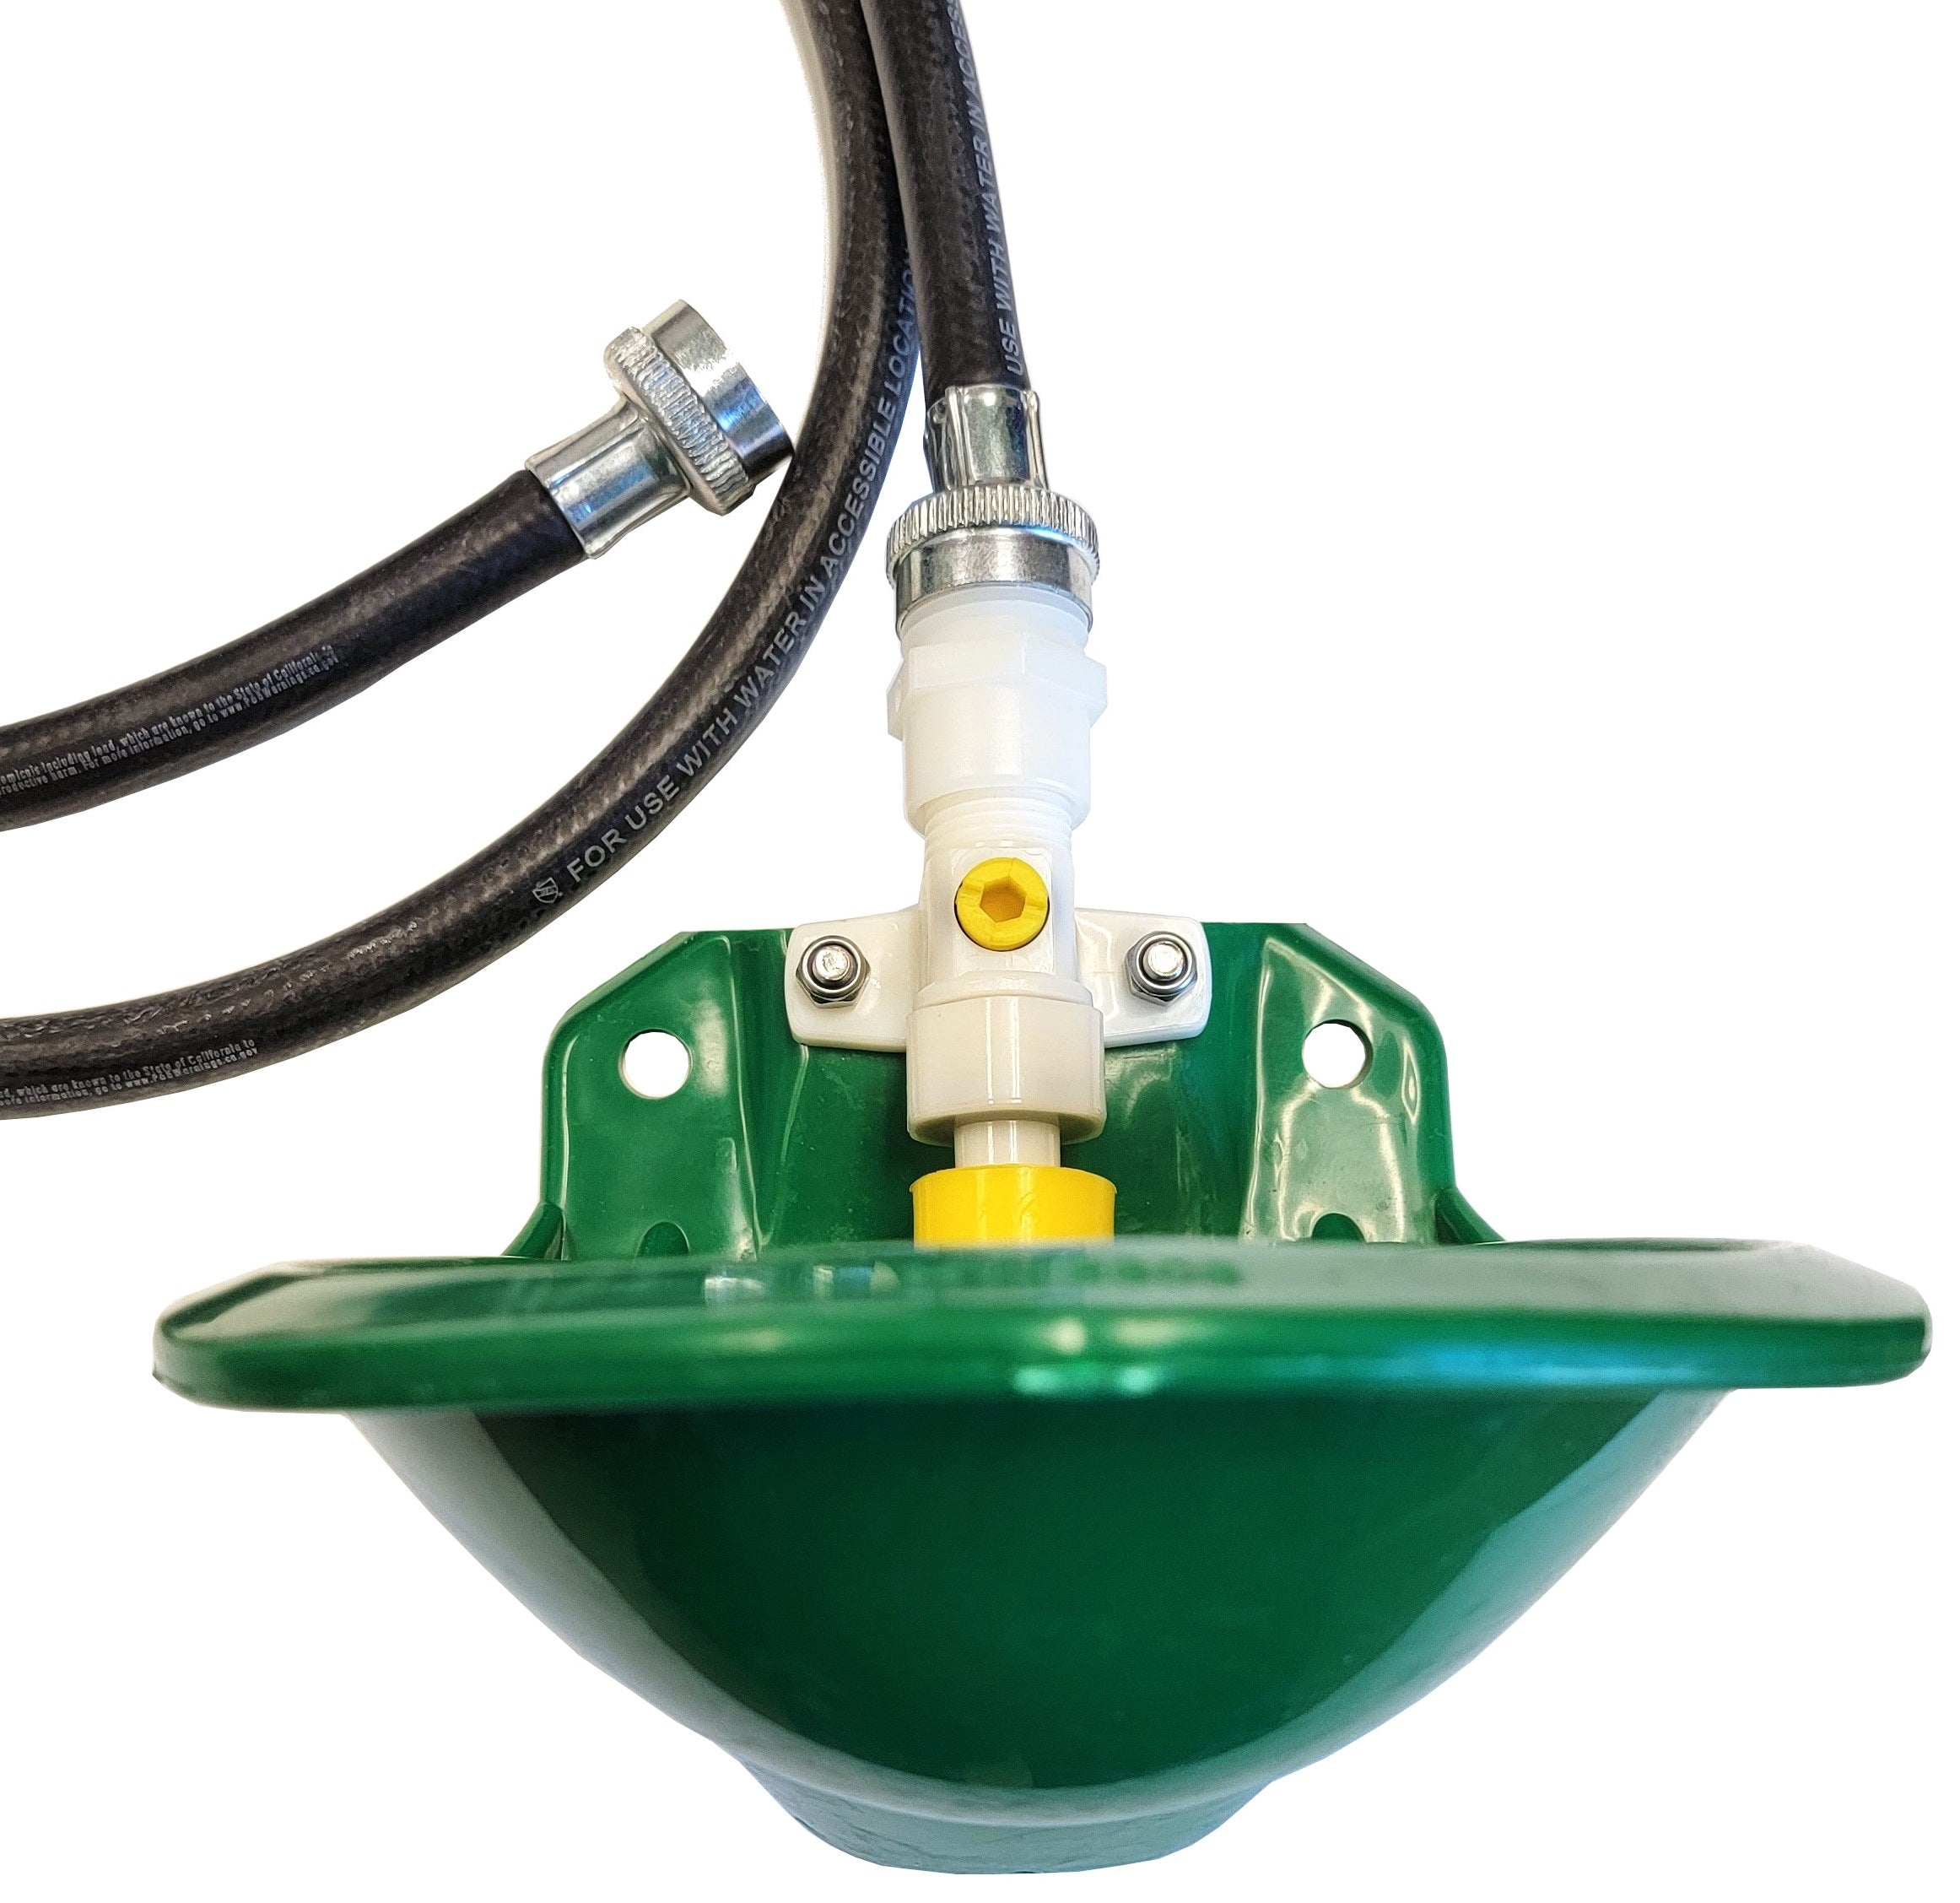 Rite Farm Products Poly Automatic Stock Waterer Drinker with Hose & Fitting